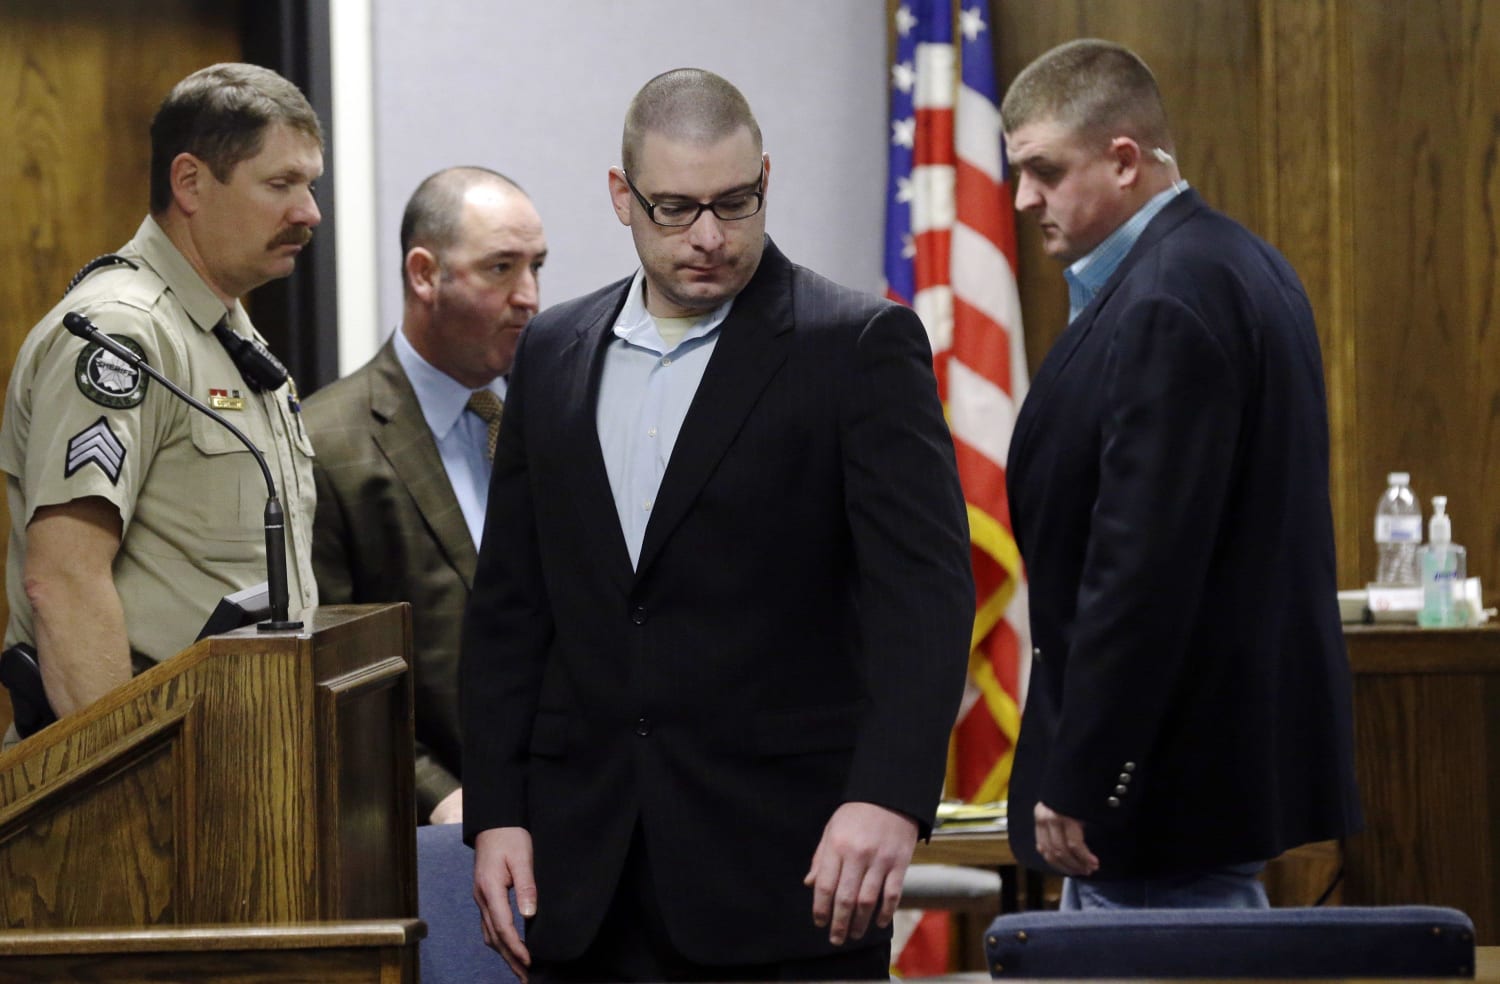 American Sniper Trial Kicks Off With Range Far Beyond the.